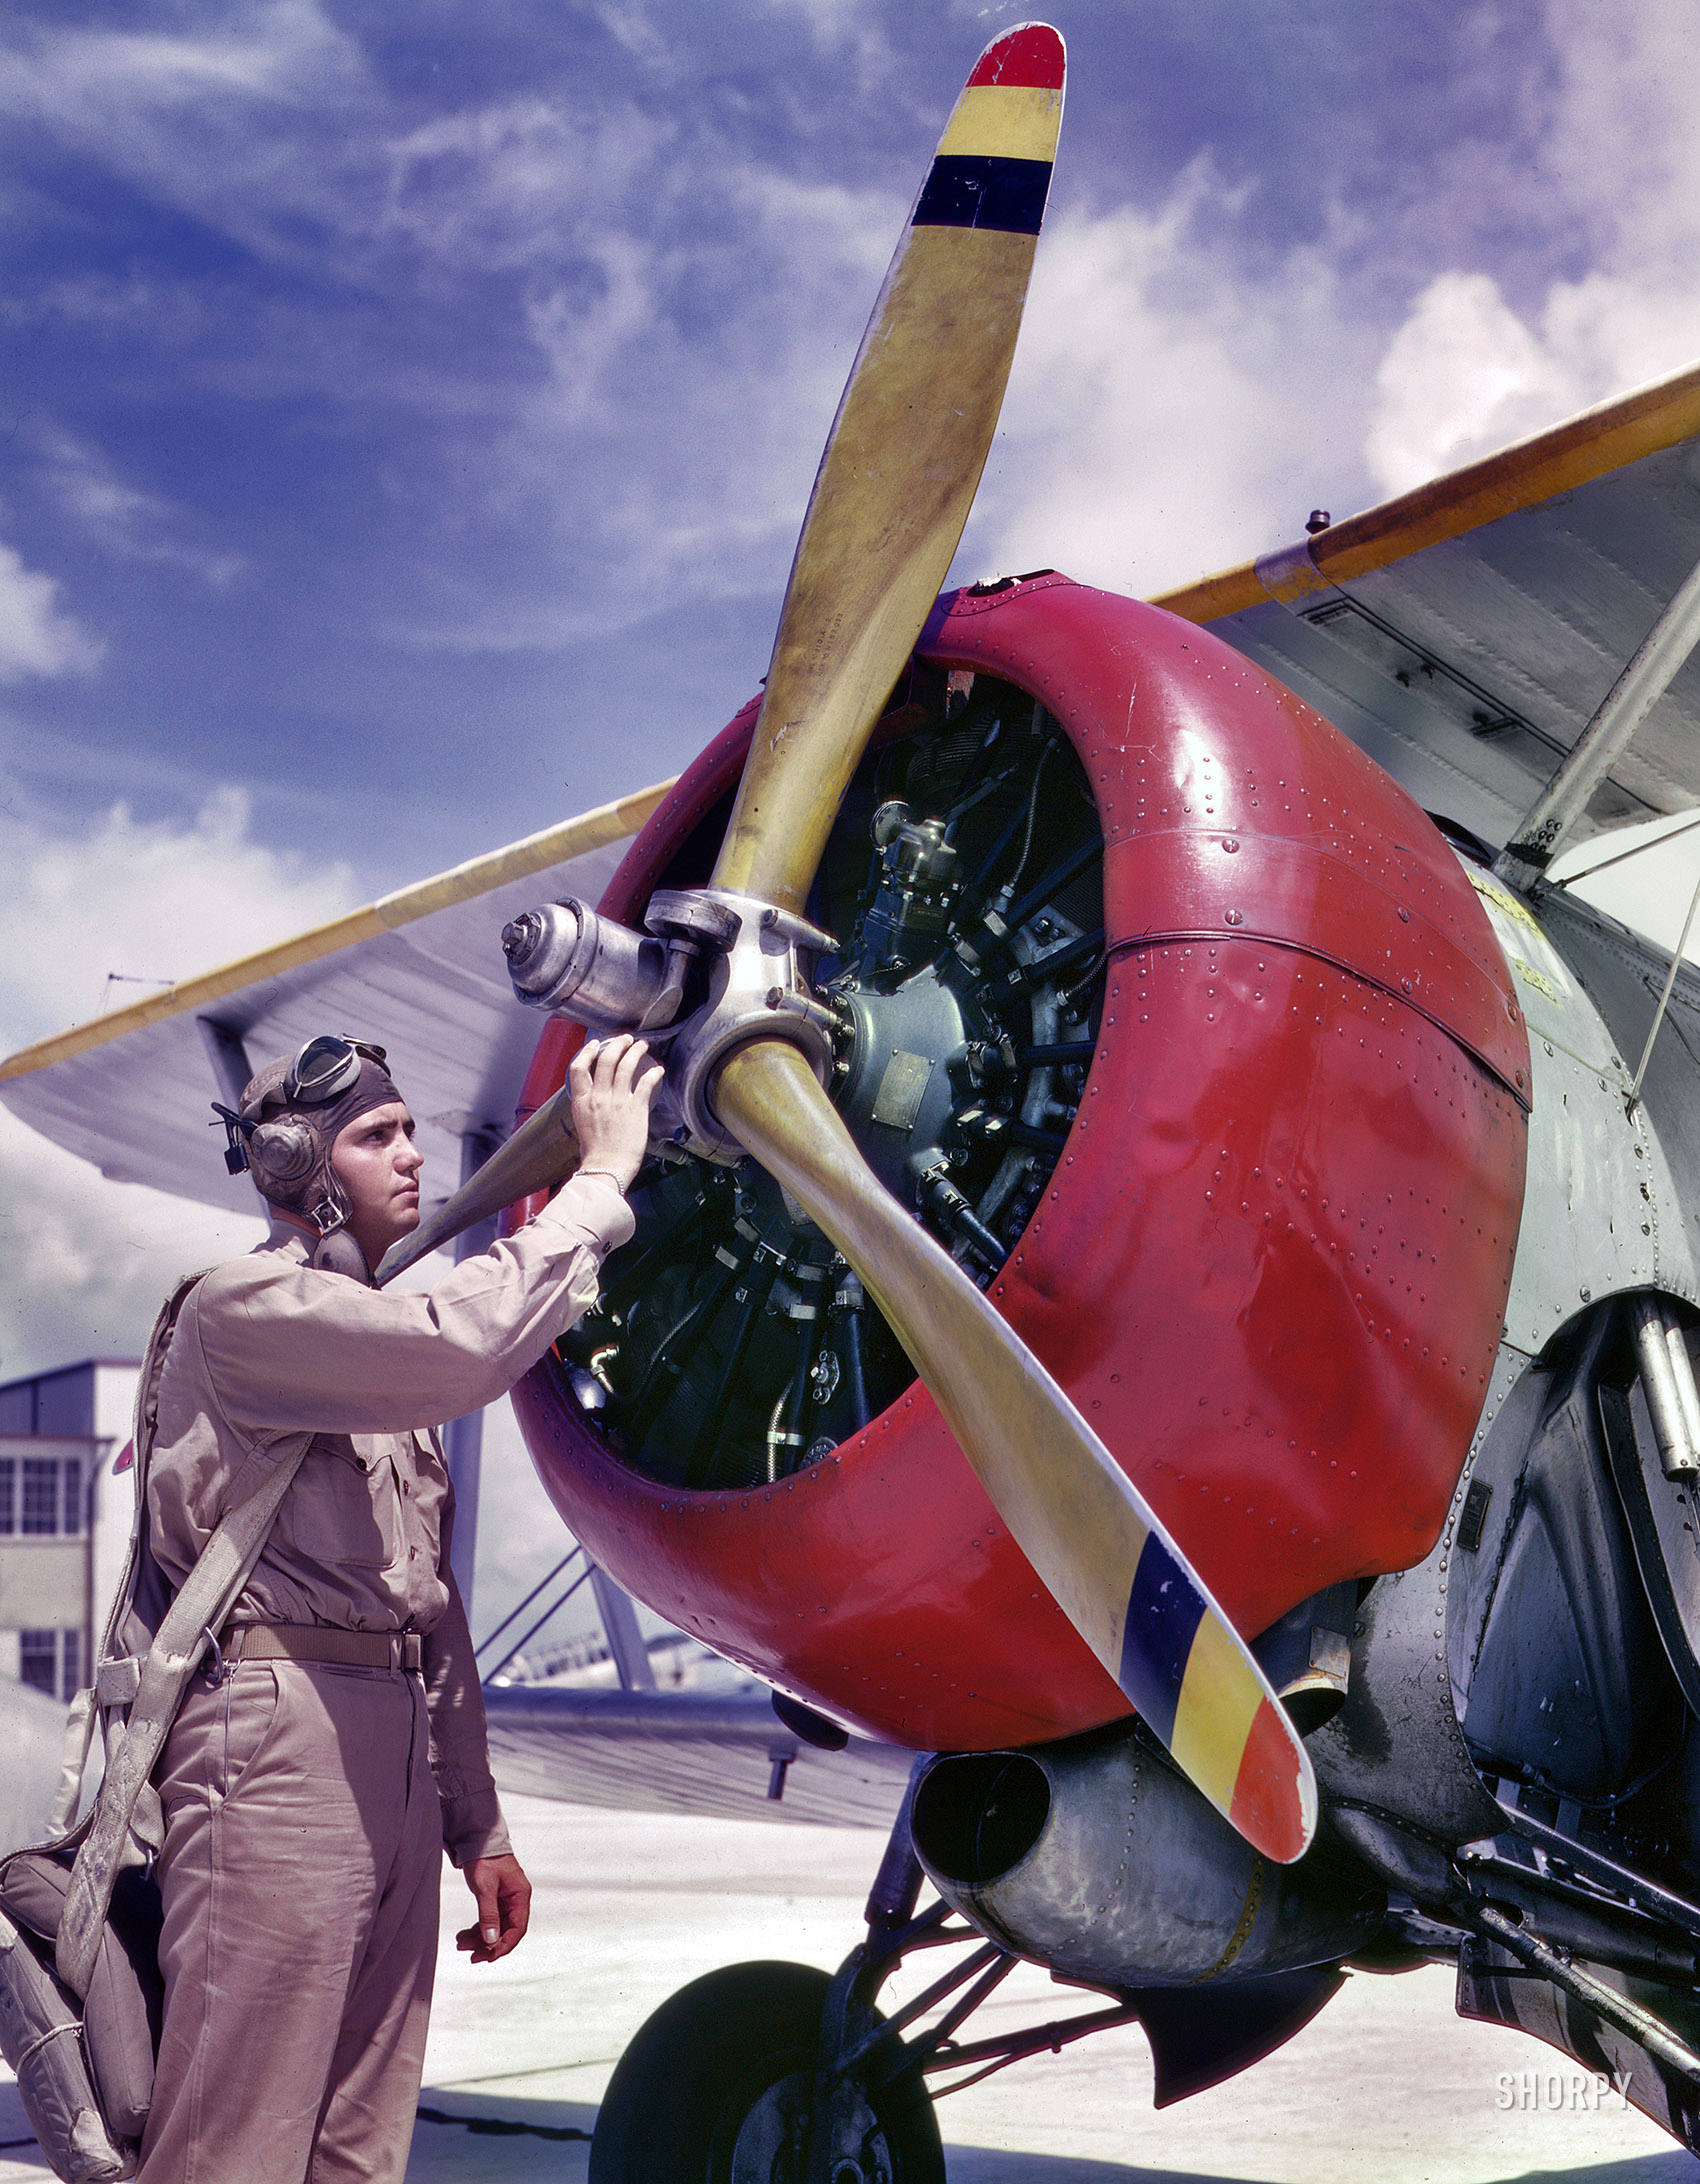 August 1942. Corpus Christi, Texas. "Aviation Cadet Thanas at Naval Air Base." 4x5 Kodachrome by Howard Hollem, Office of War Information. View full size.